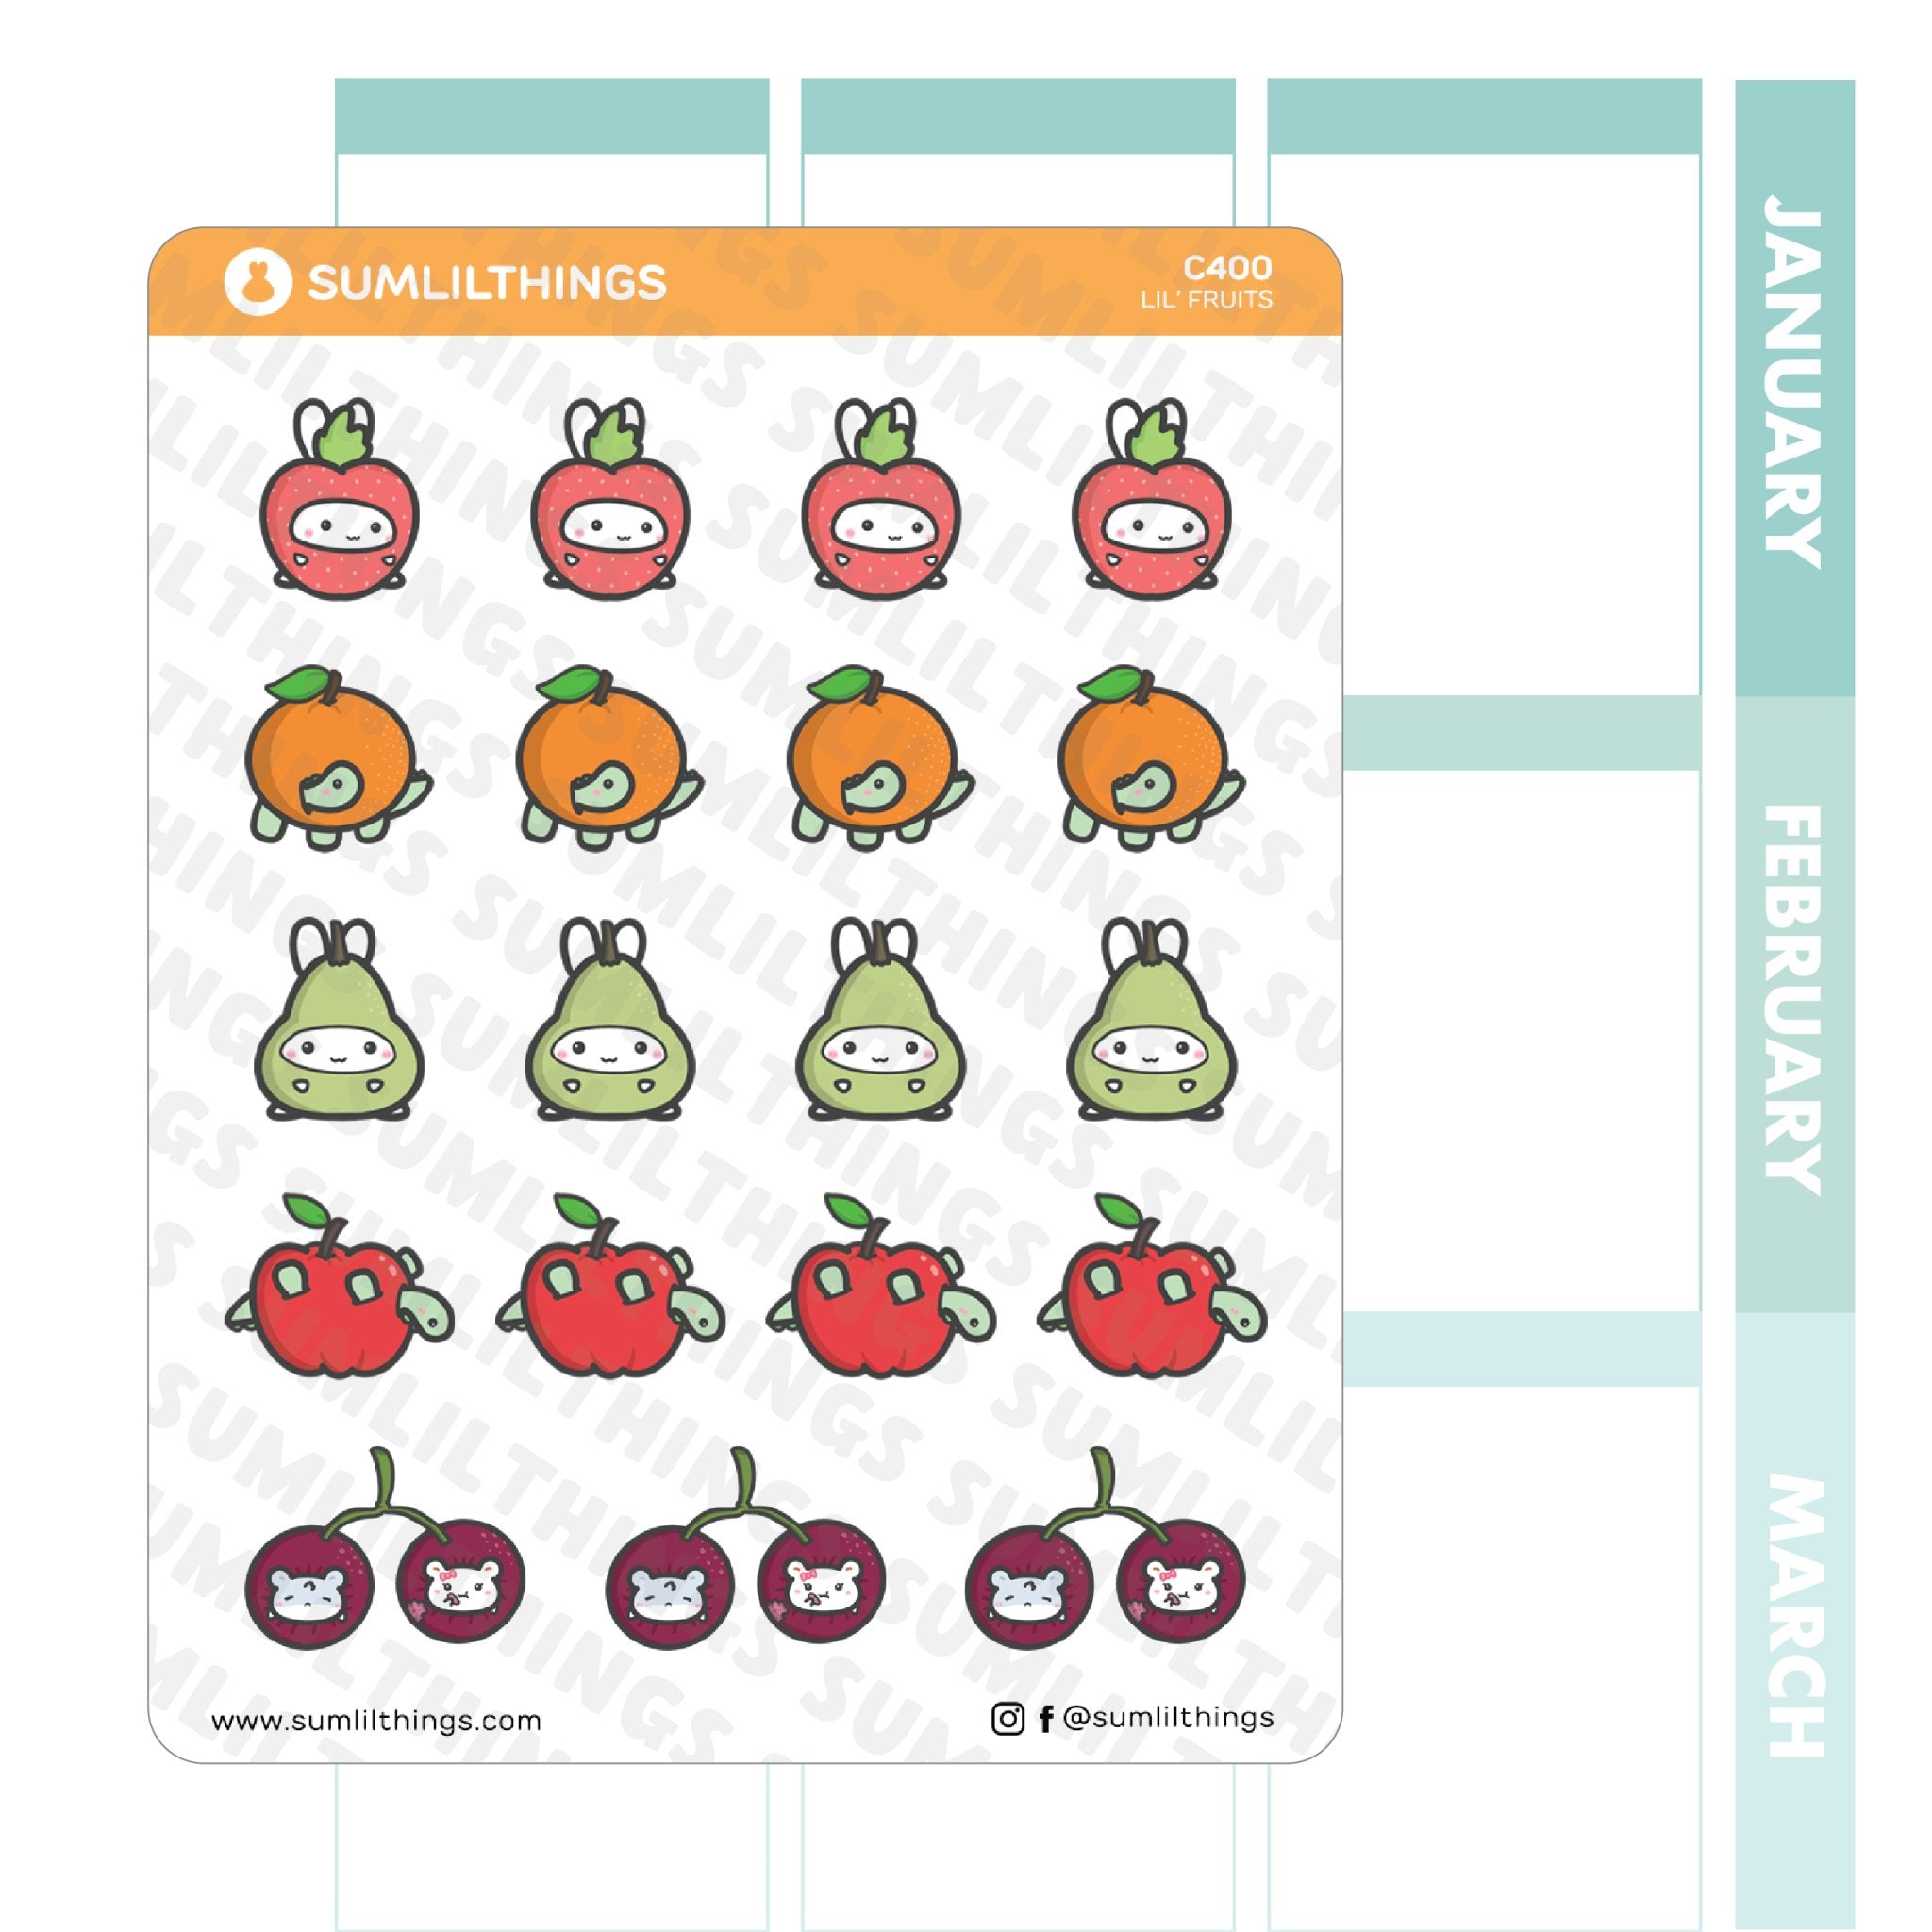 Lil&#39; Fruits Stickers - SumLilThings